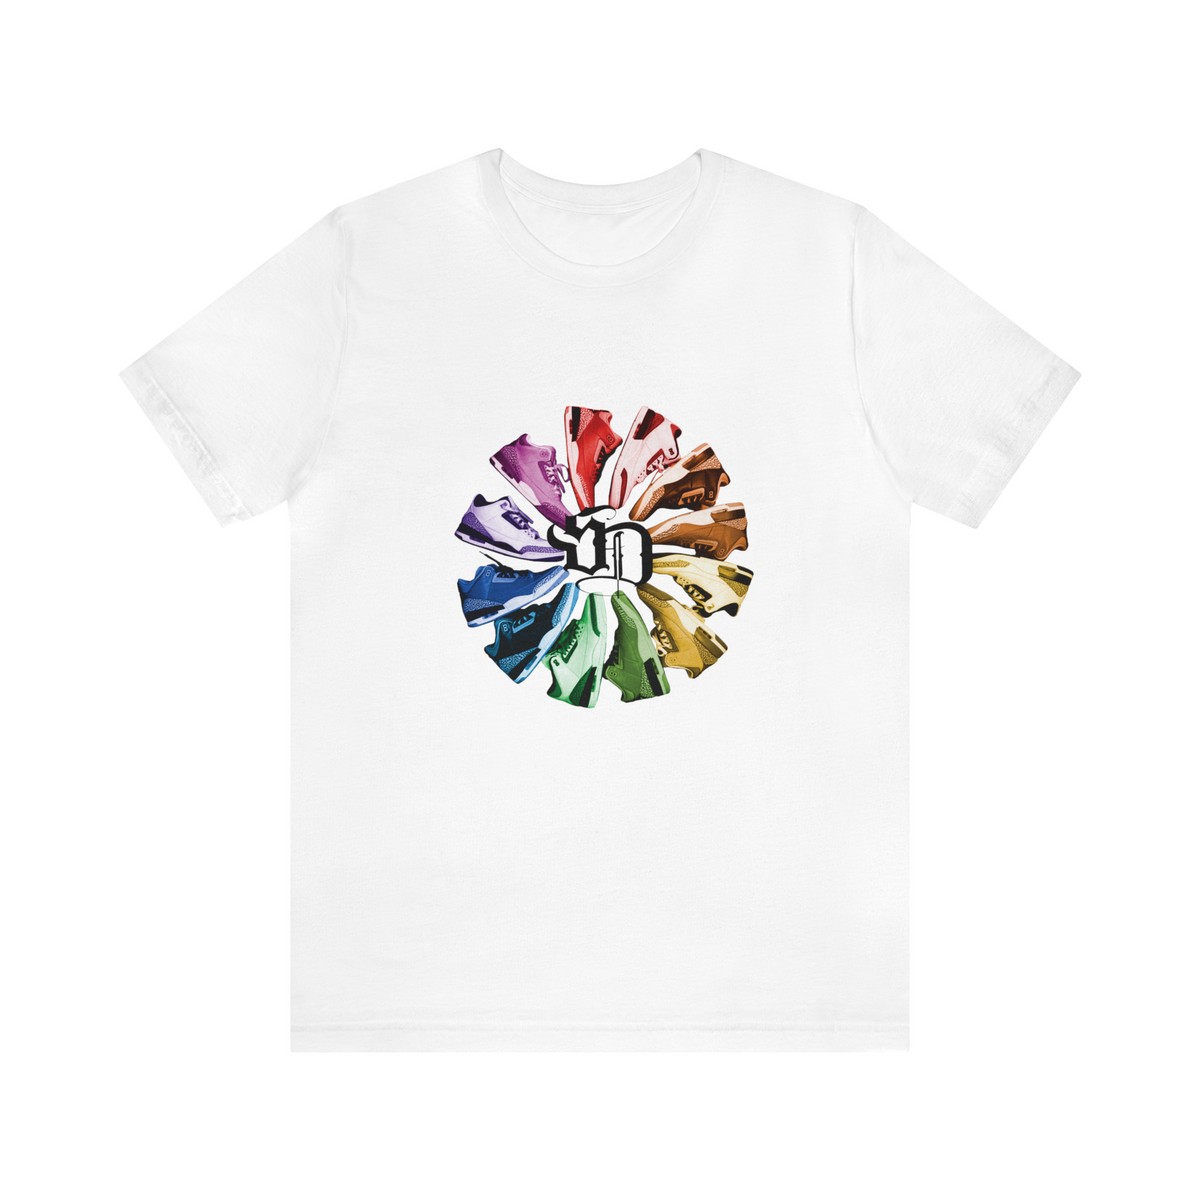 SDCF 'Reimagined 3s' Tee - White